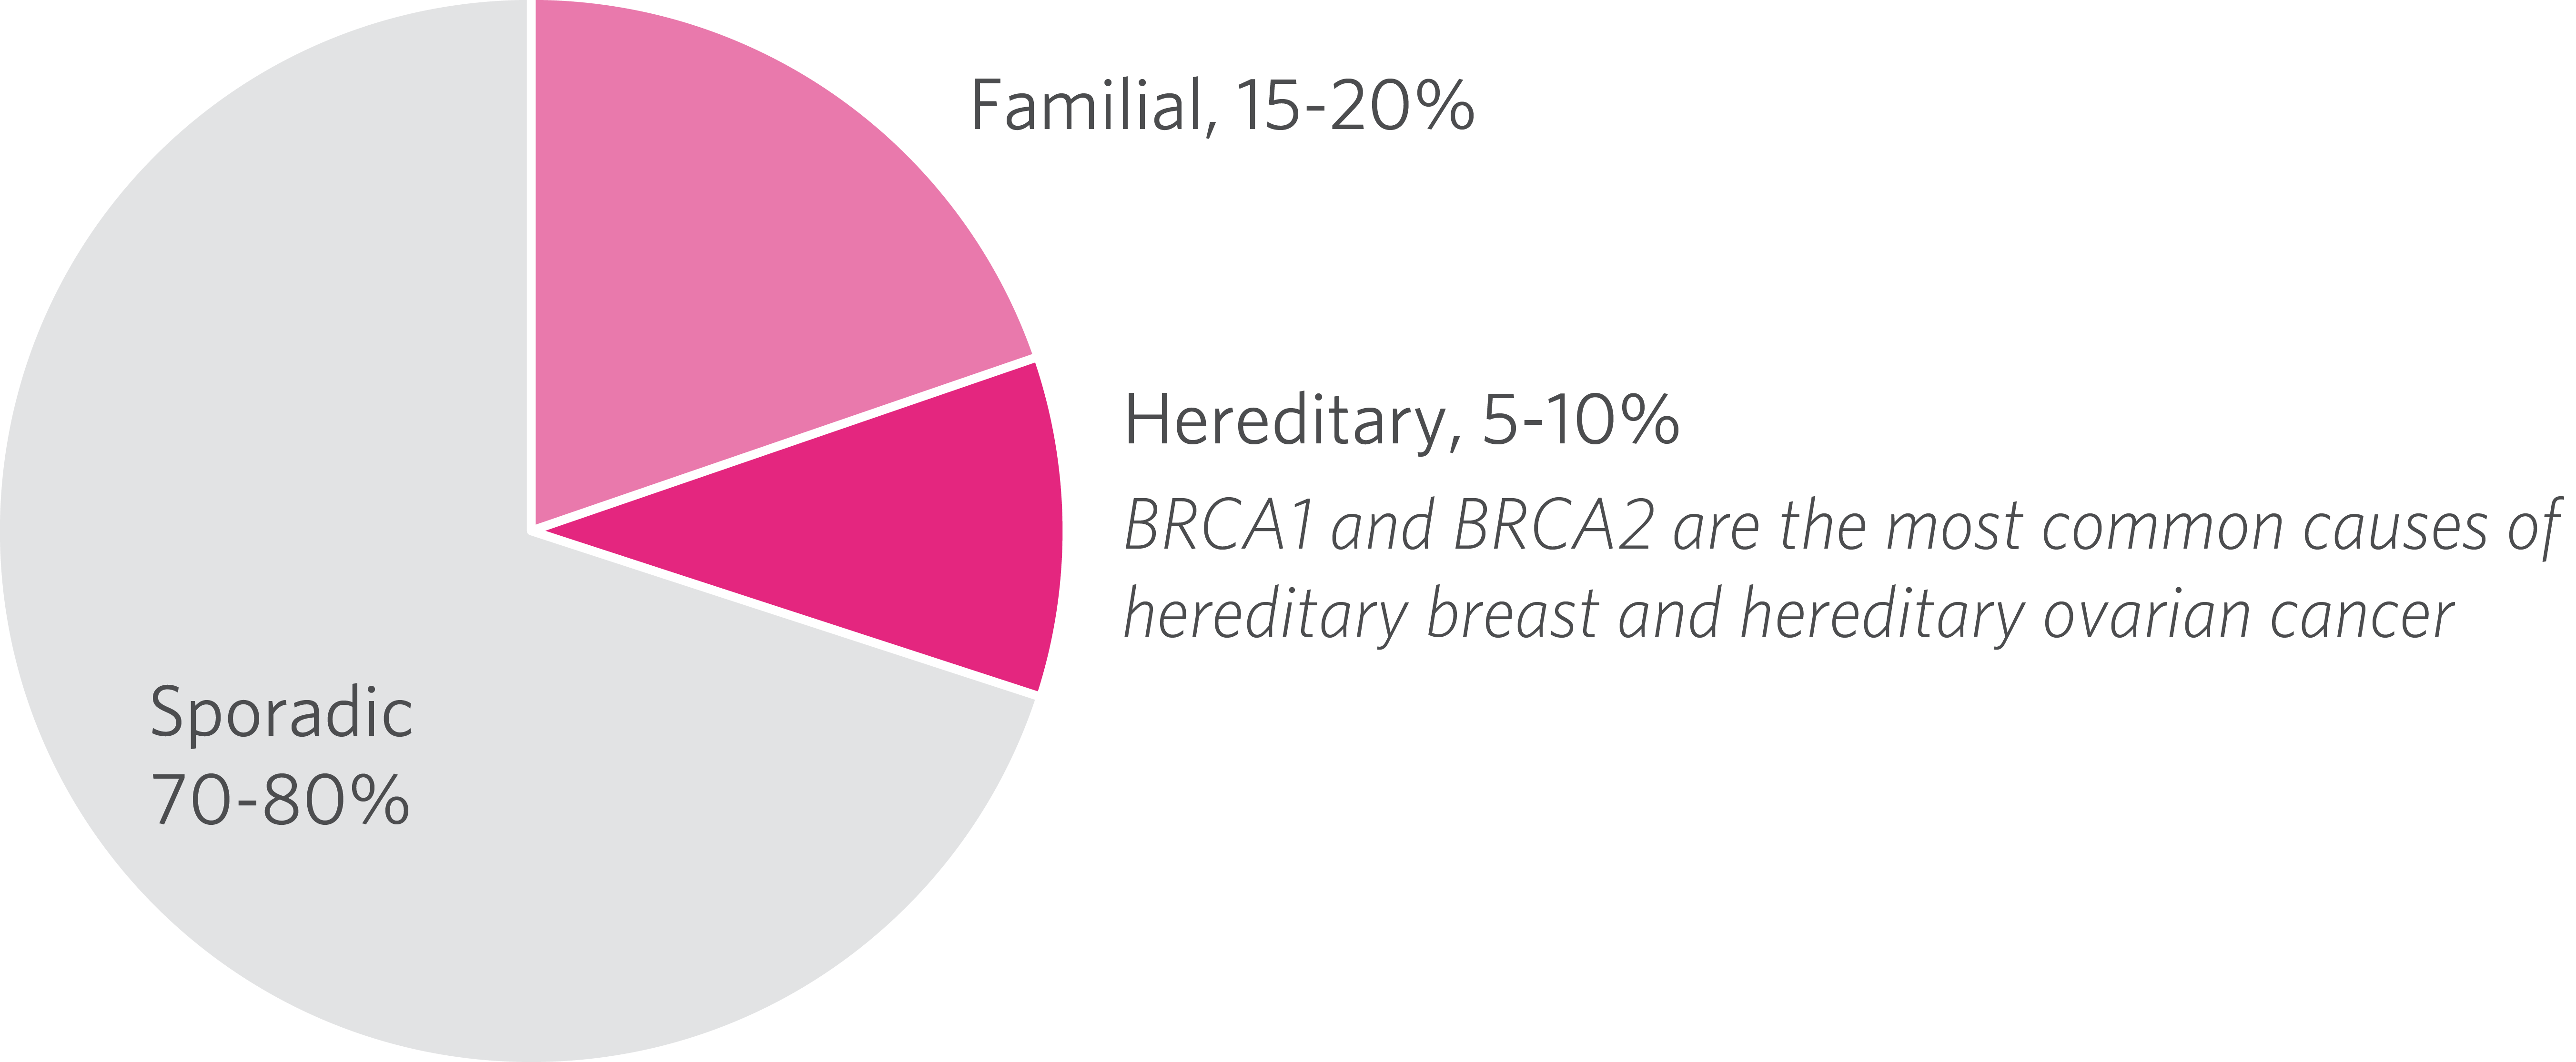 sporadic_familial_hereditary_breast_cancer_breakdown_pie_chart.png